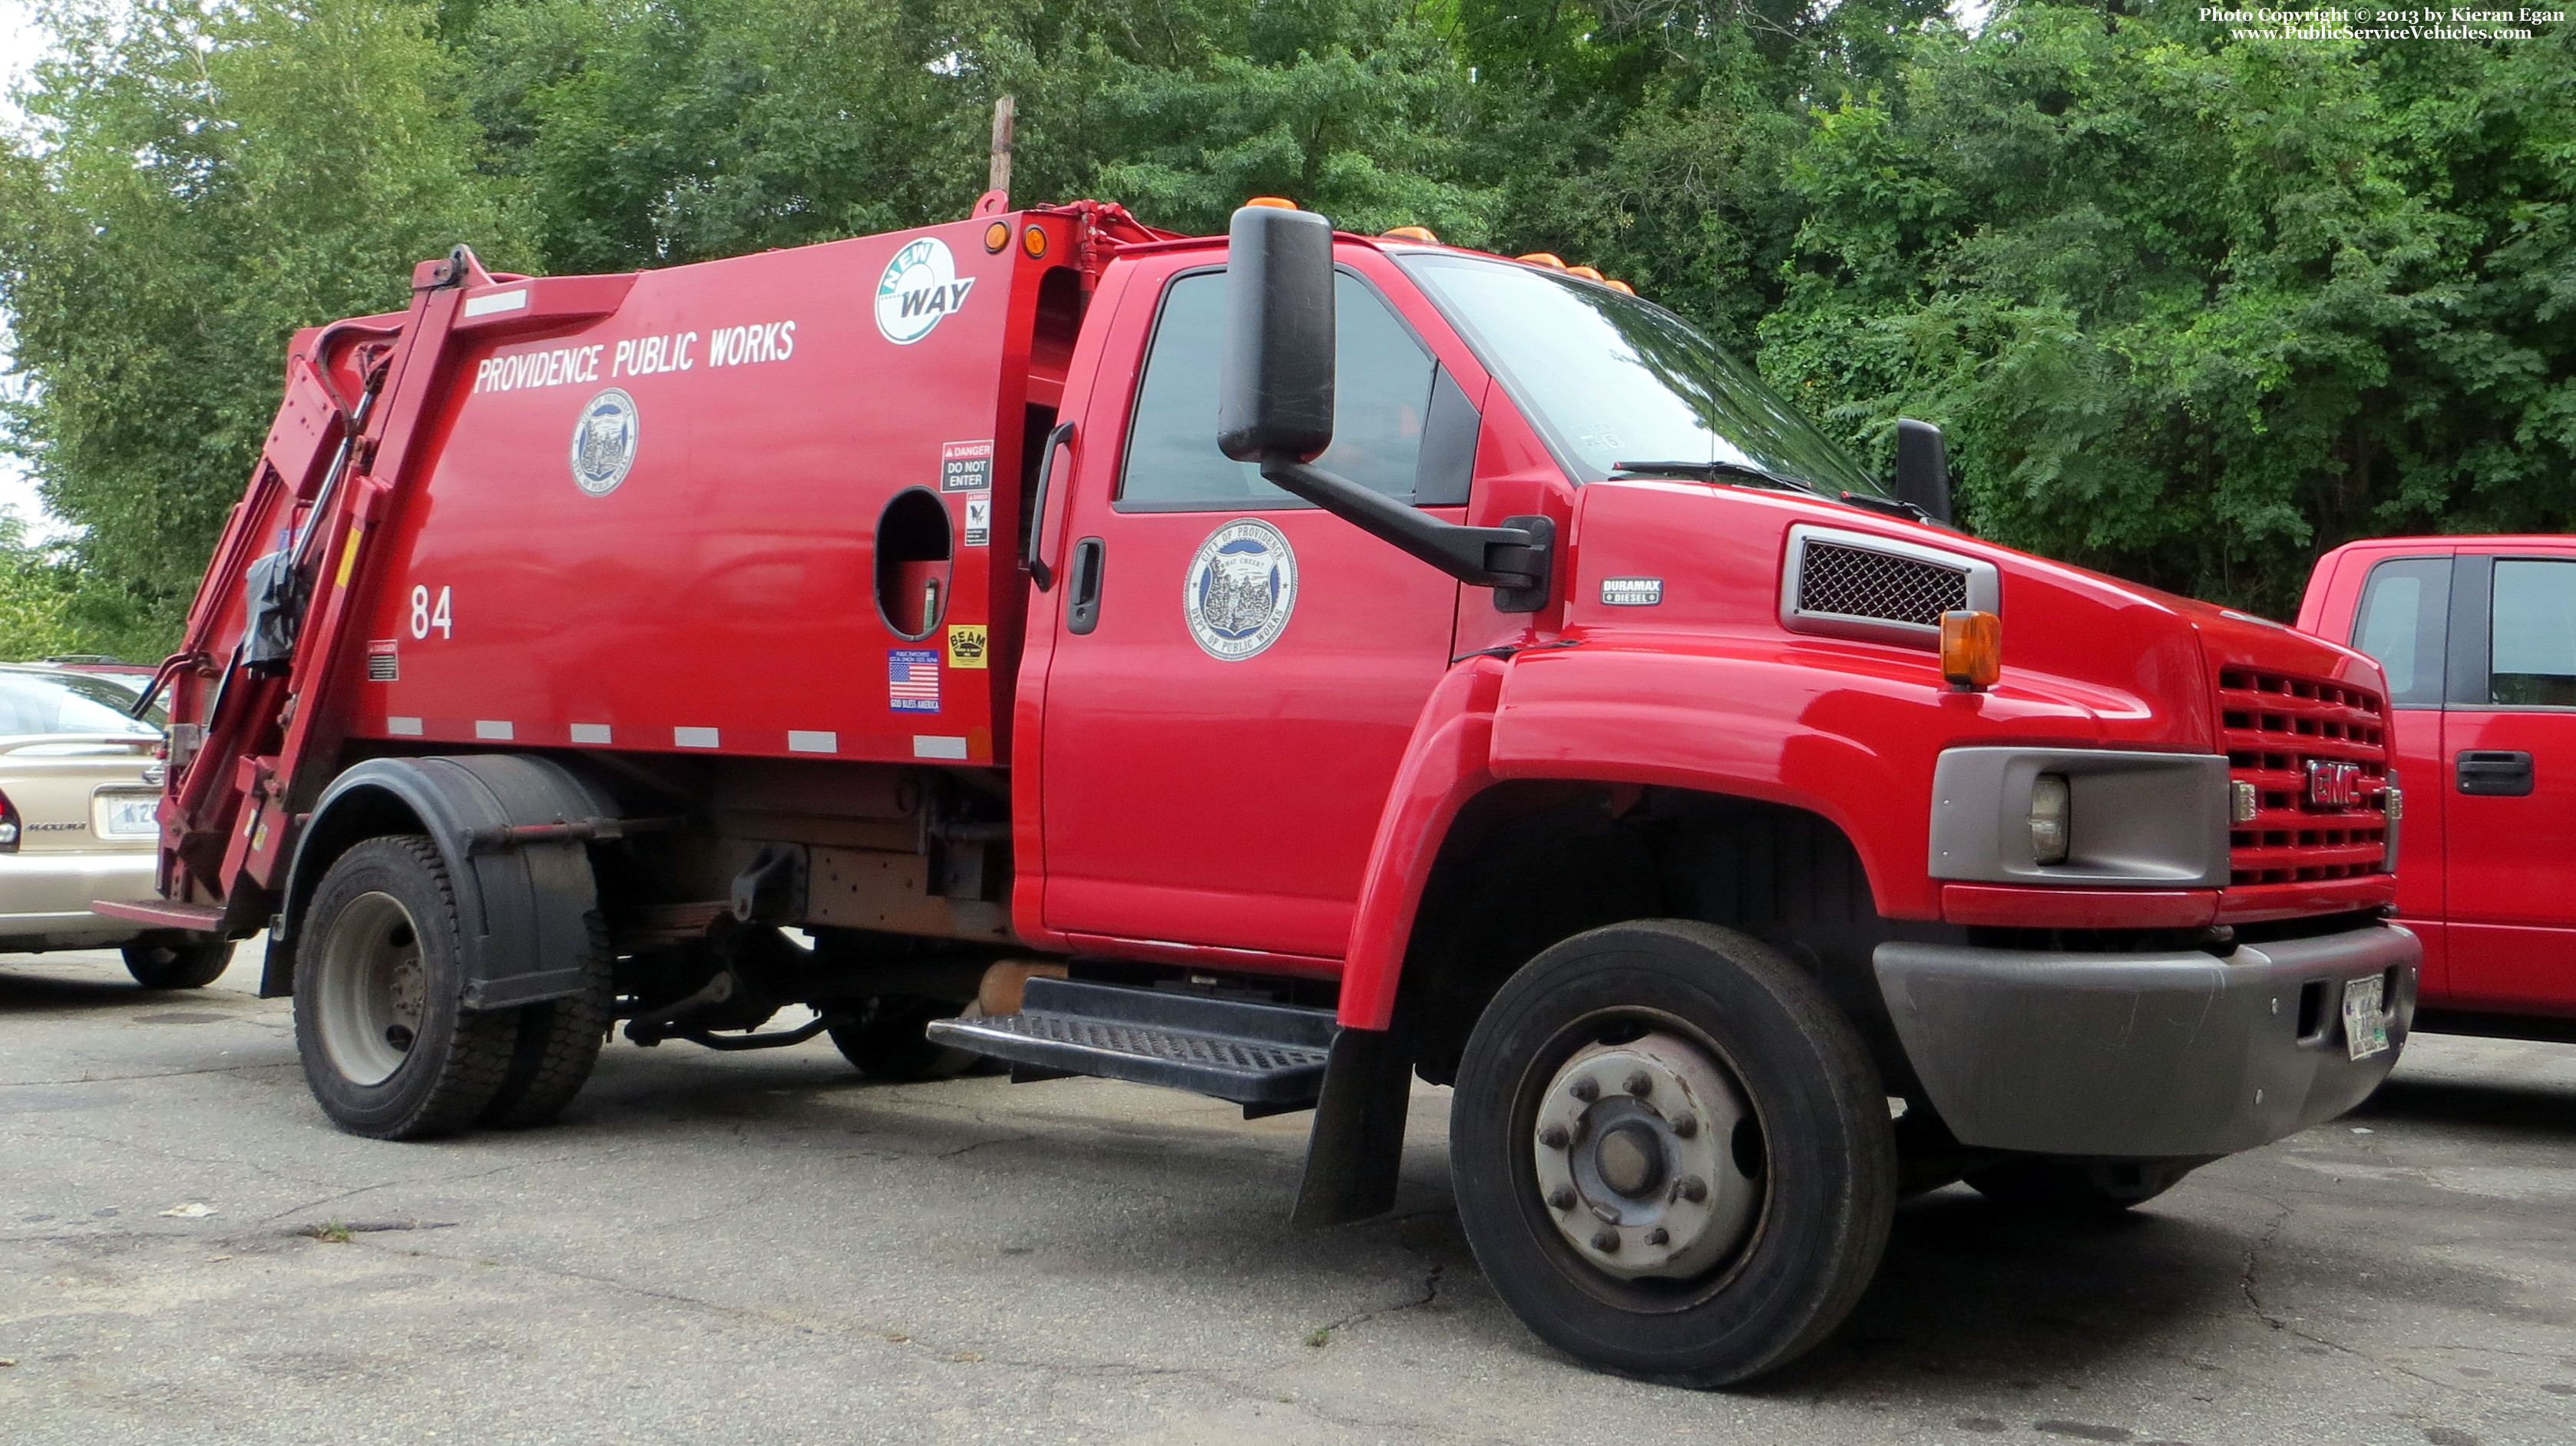 A photo  of Providence Highway Division
            Truck 84, a 2003-2009 GMC TopKick             taken by Kieran Egan